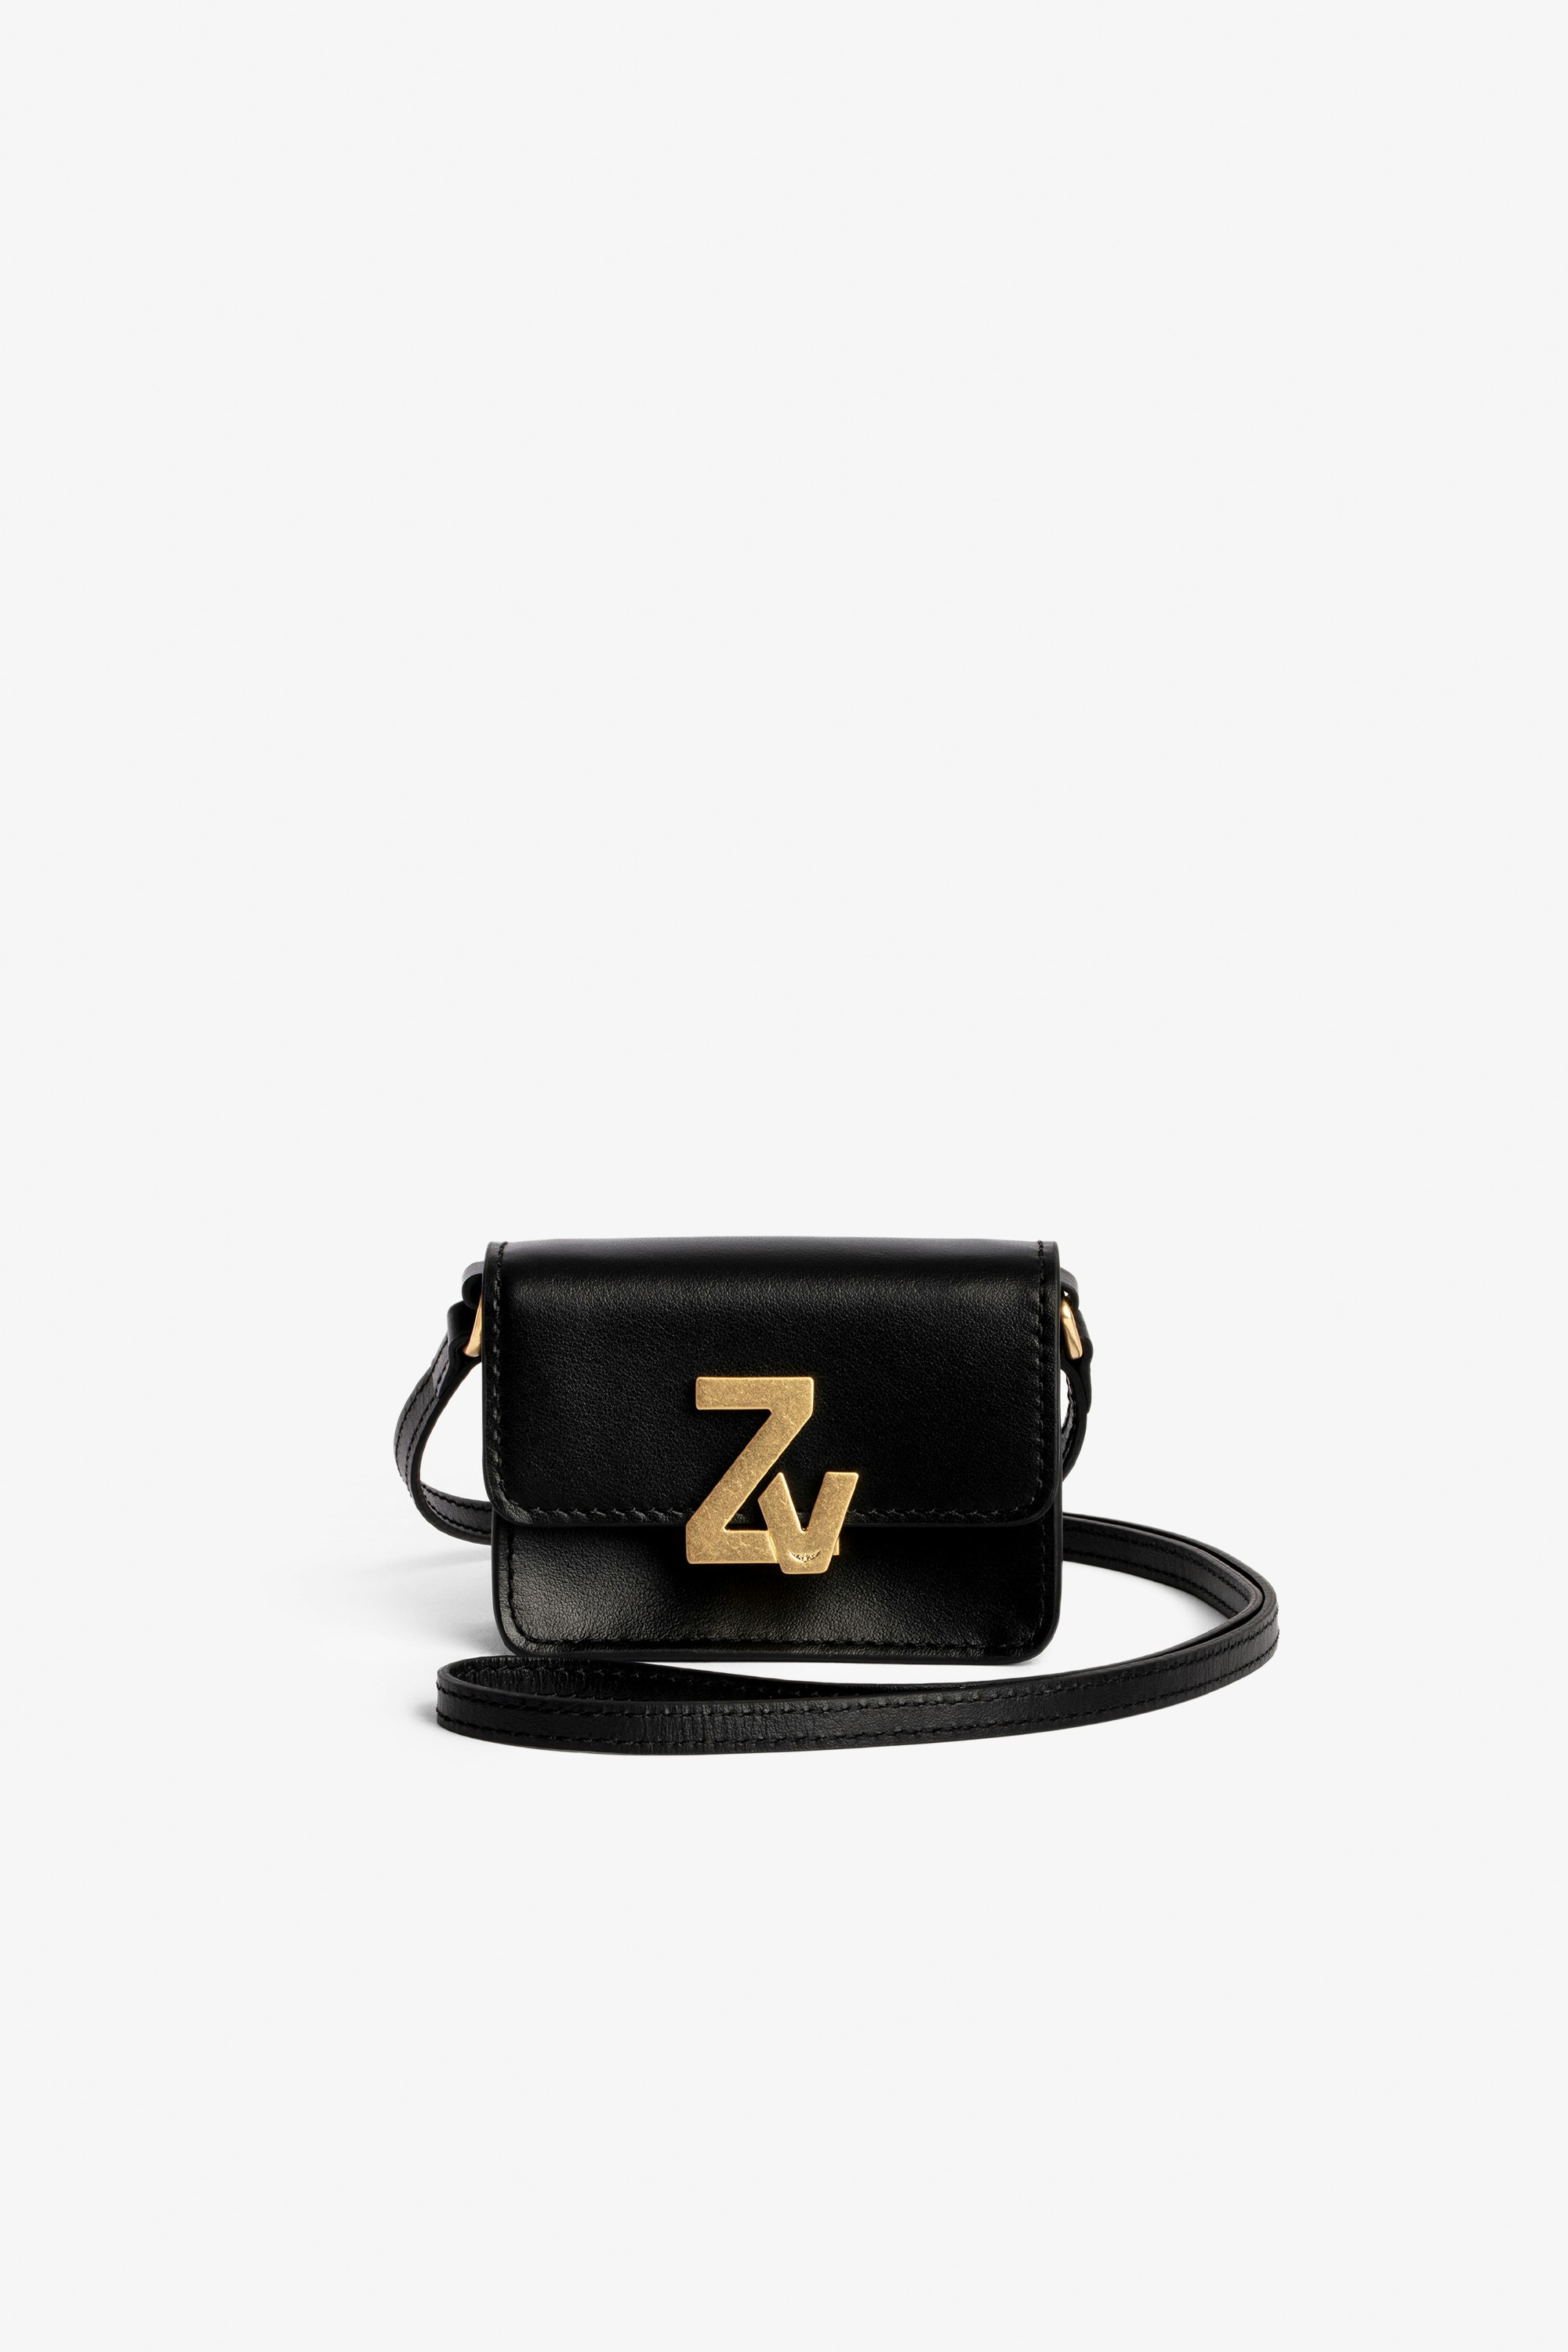 ZV Initiale City Grigri レザークラッチバッグ  Women's small black leather wallet-style clutch with shoulder strap